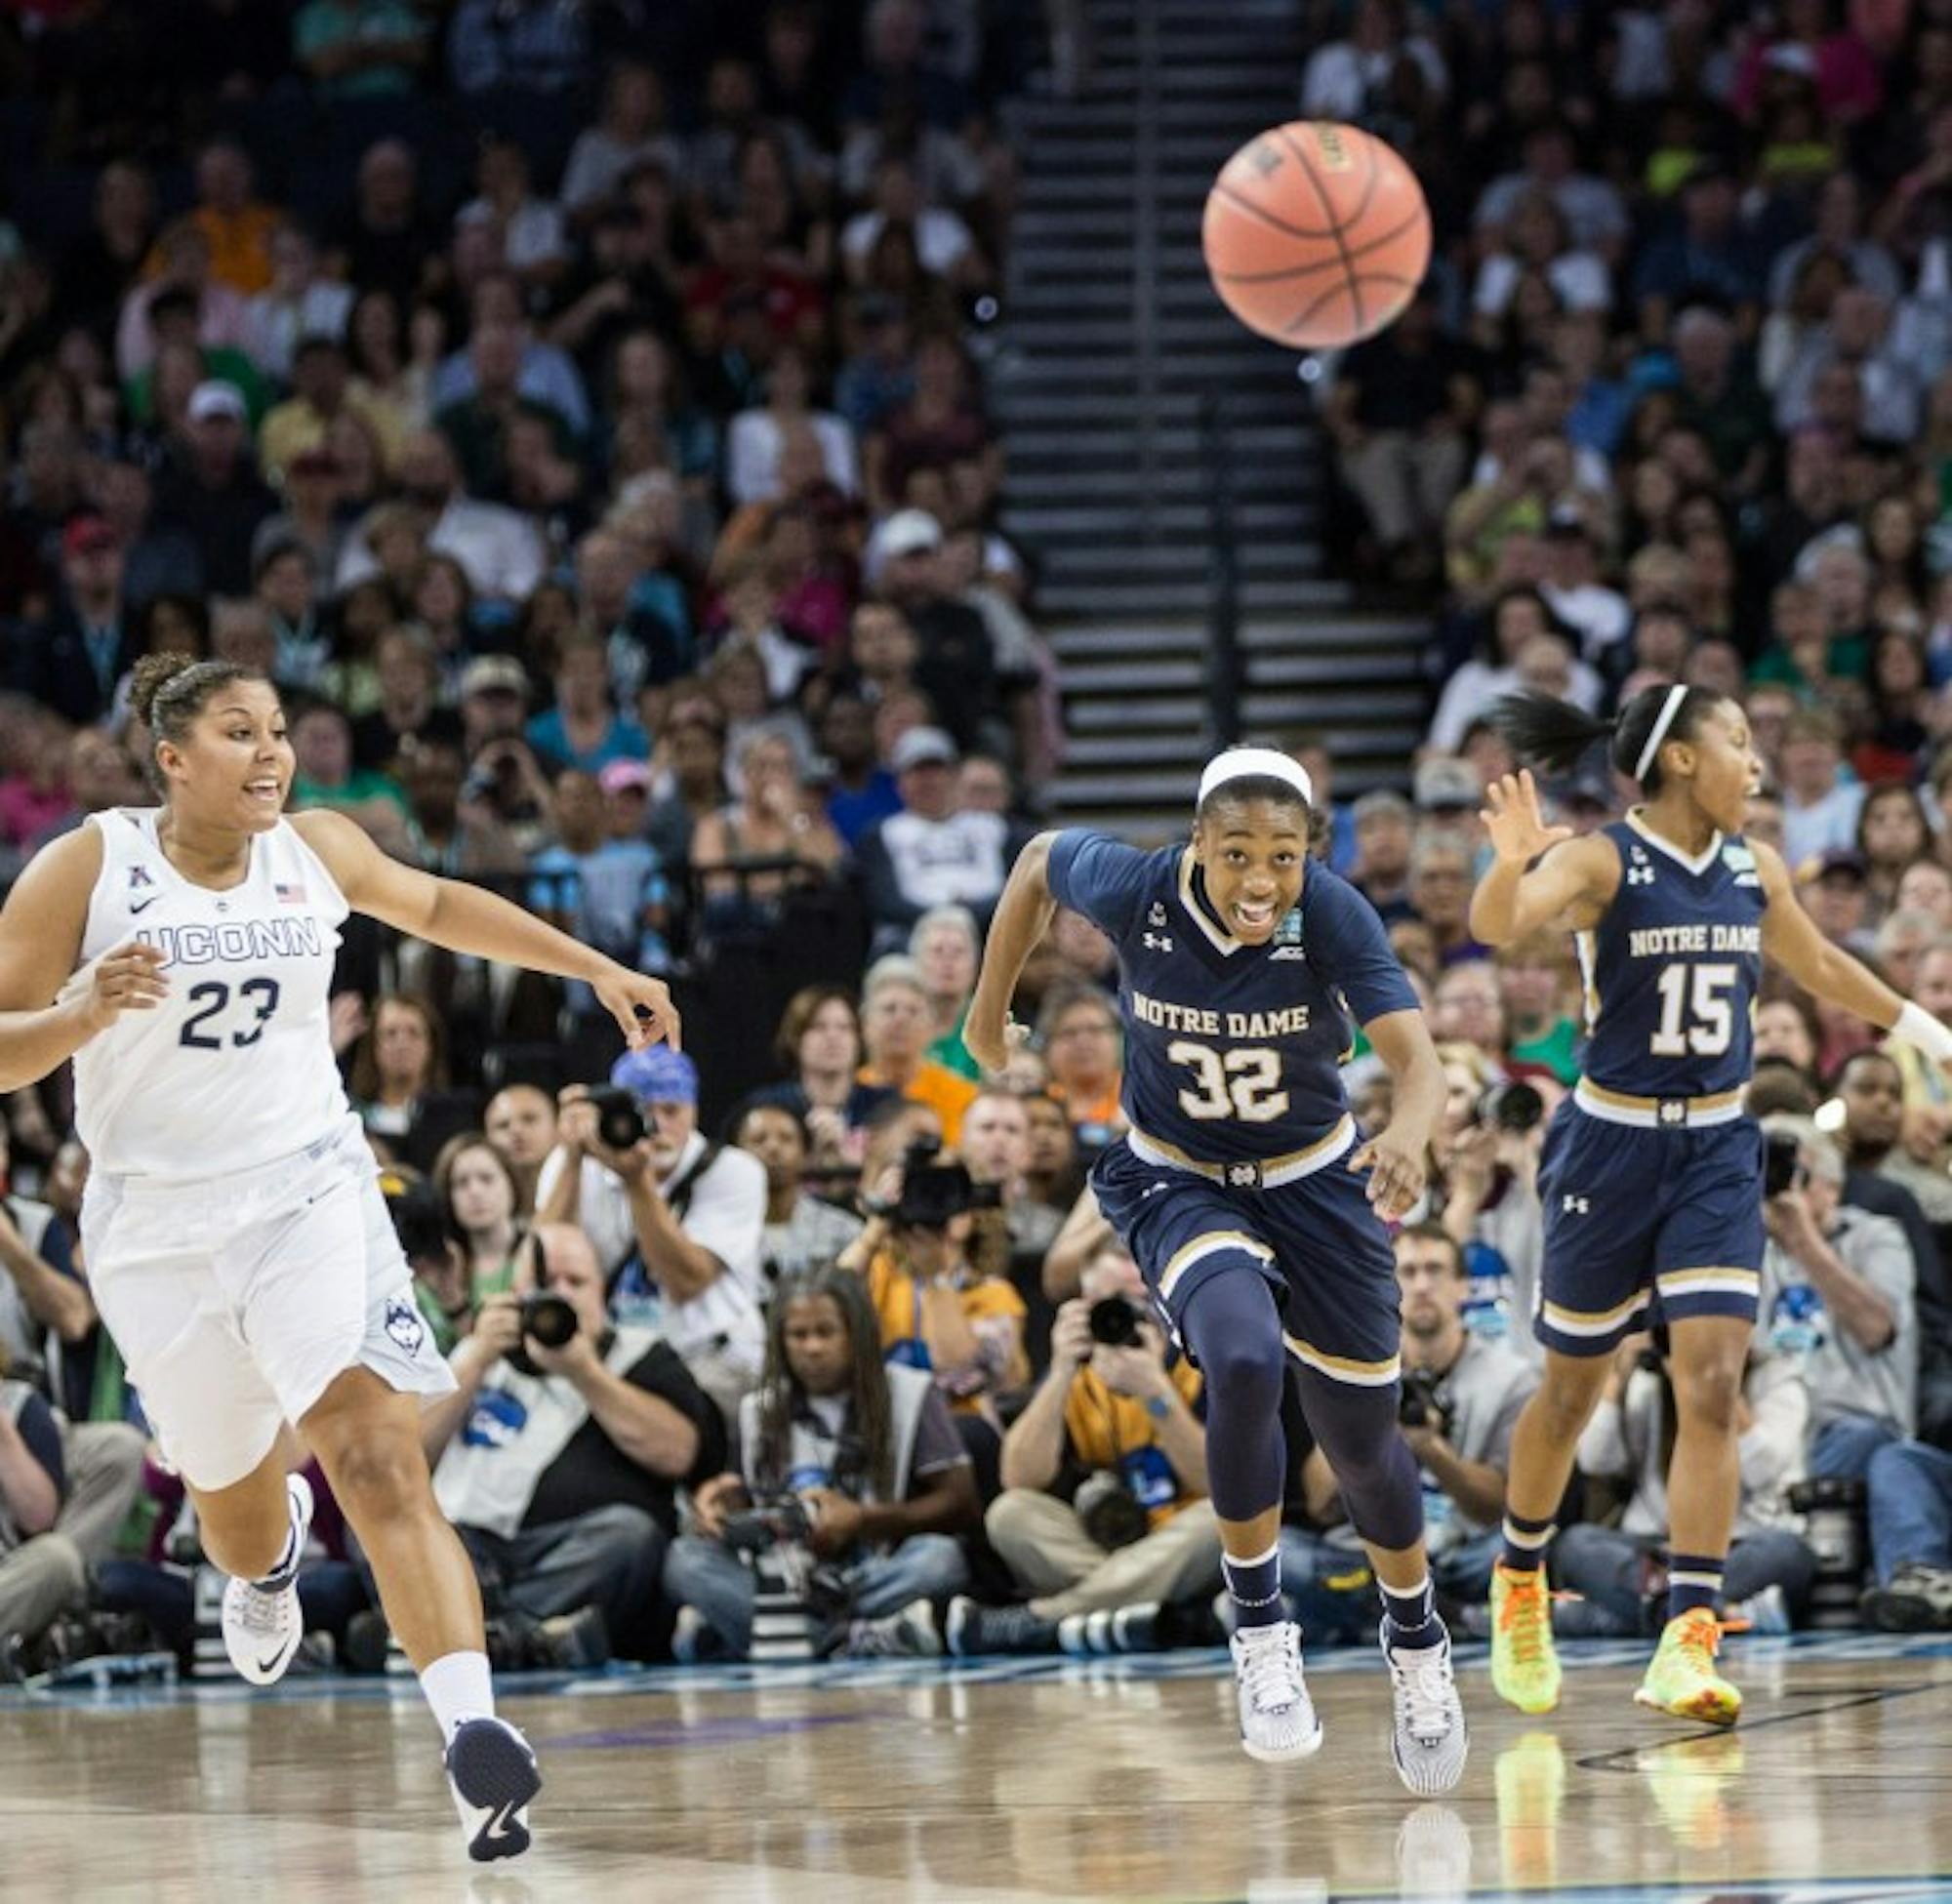 Irish junior guard Jewell Loyd pursues a loose ball during Tuesday's 63-53 loss to Connecticut in the NCAA championship game.